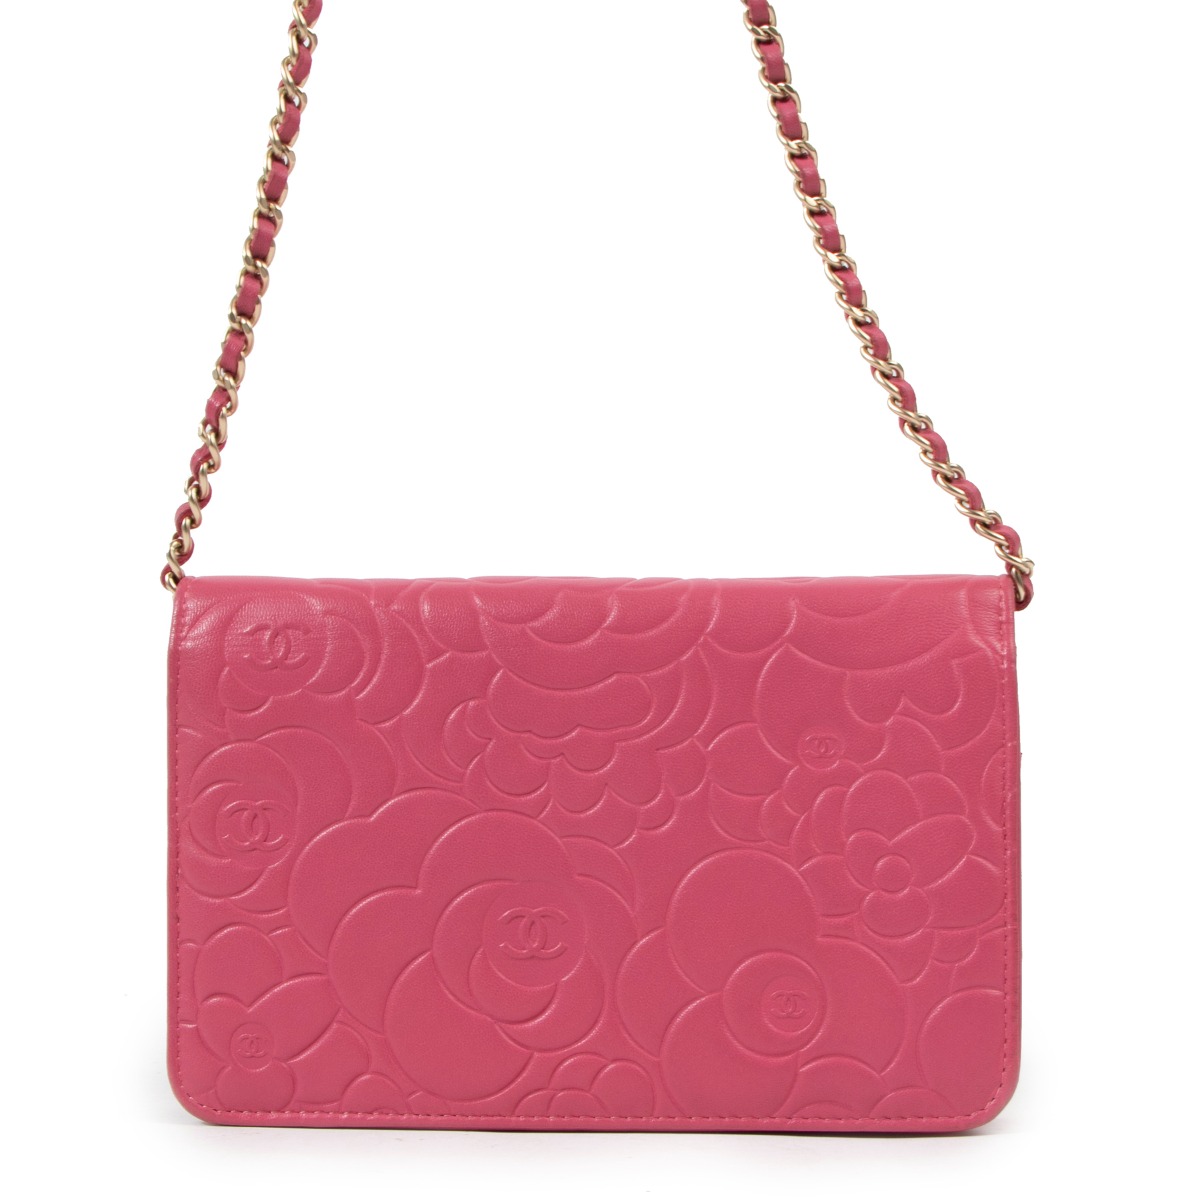 Buy Camellia Bags Online Shopping at